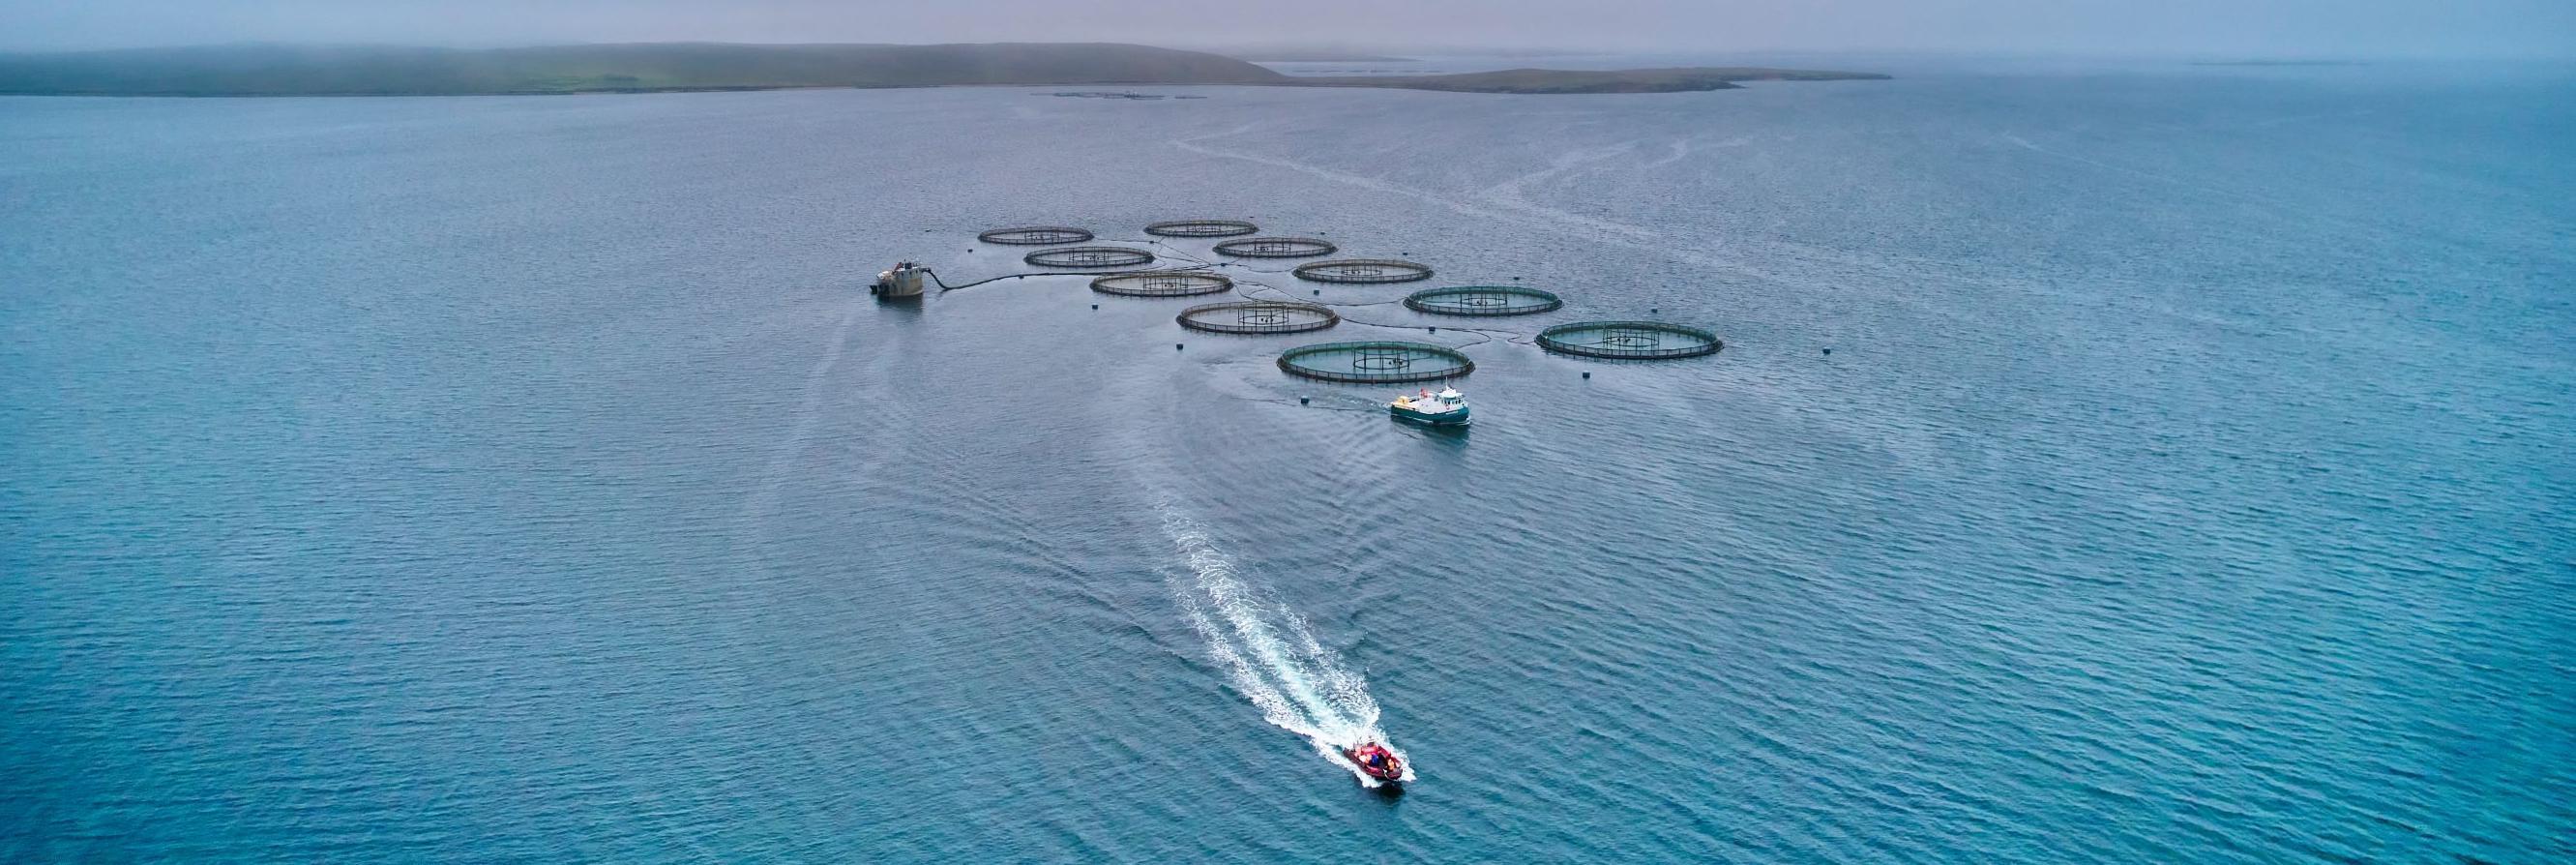 Boat in the water with salmon cages